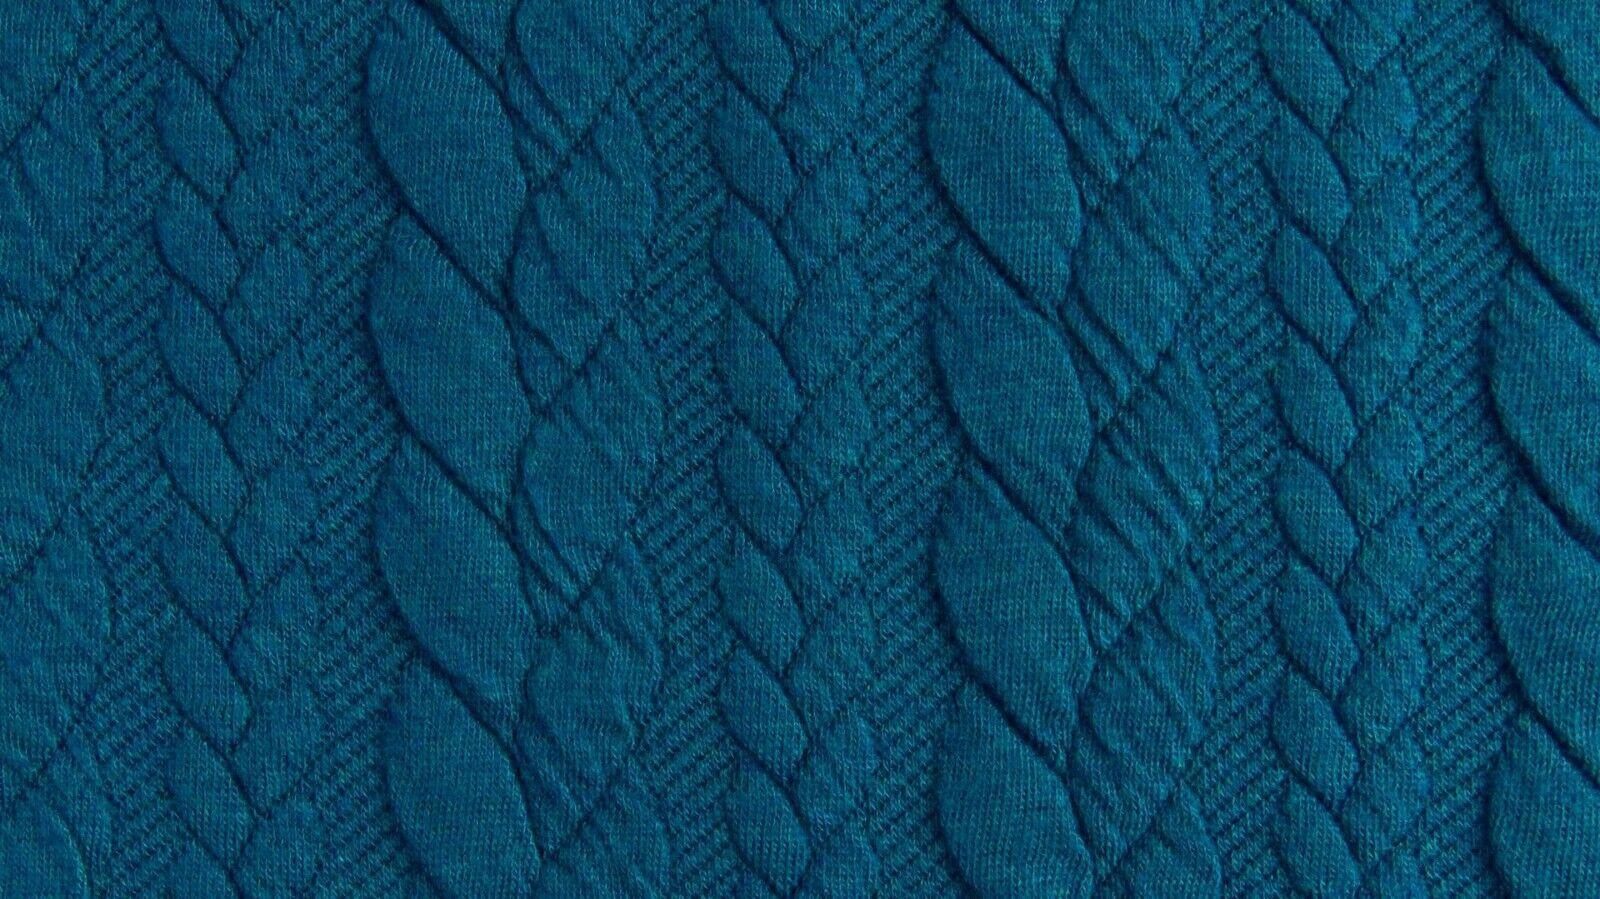 Plain Cable Knit Jersey ideal for jumpers cardigans sweaters Fabric M1659